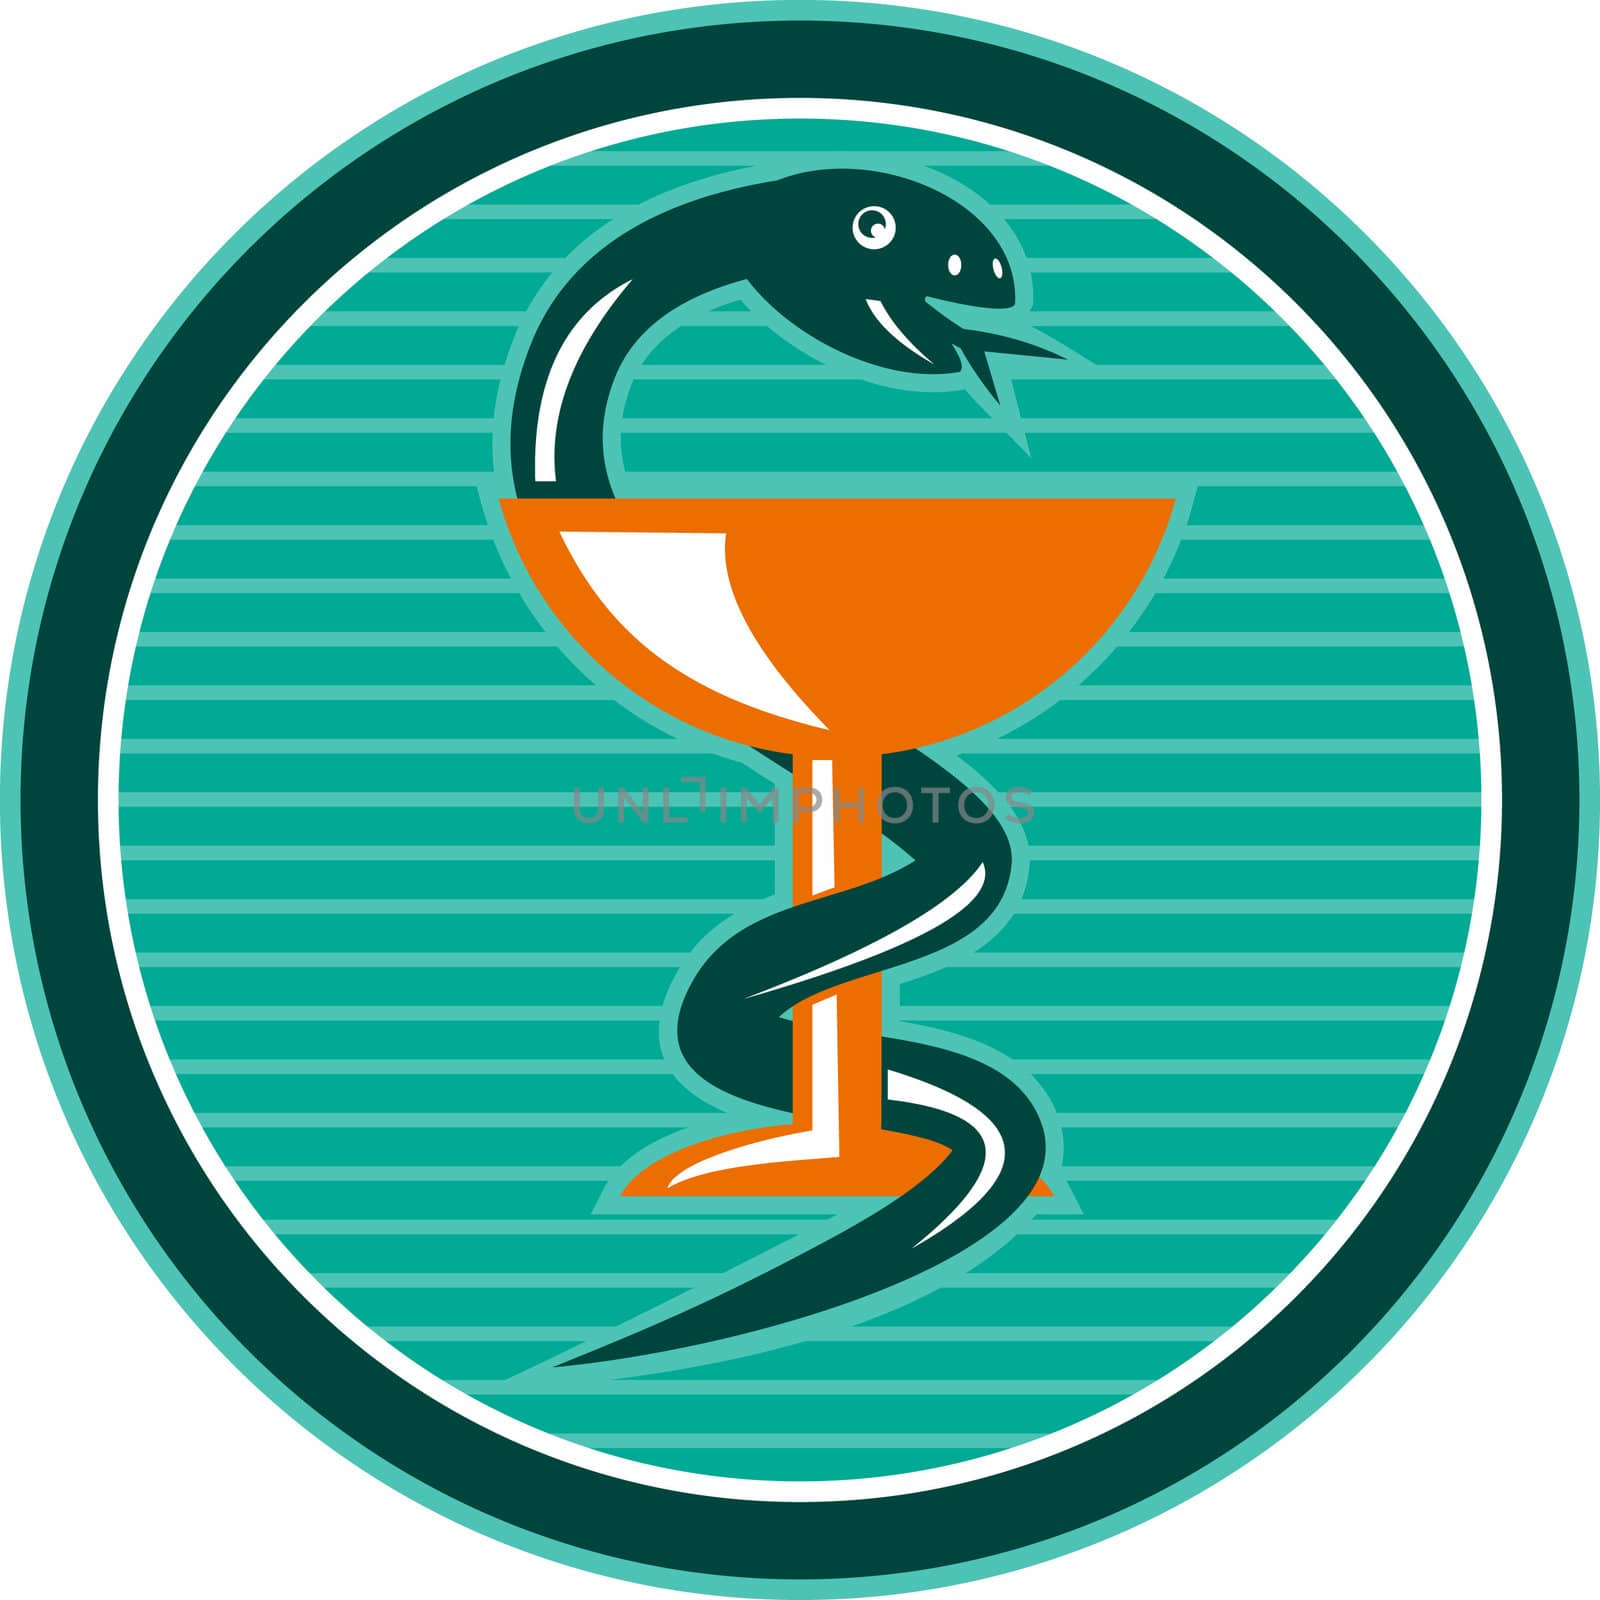 illustration of a snake curling or coiling in cup or wine glass which represents medicine symbol done in retro style